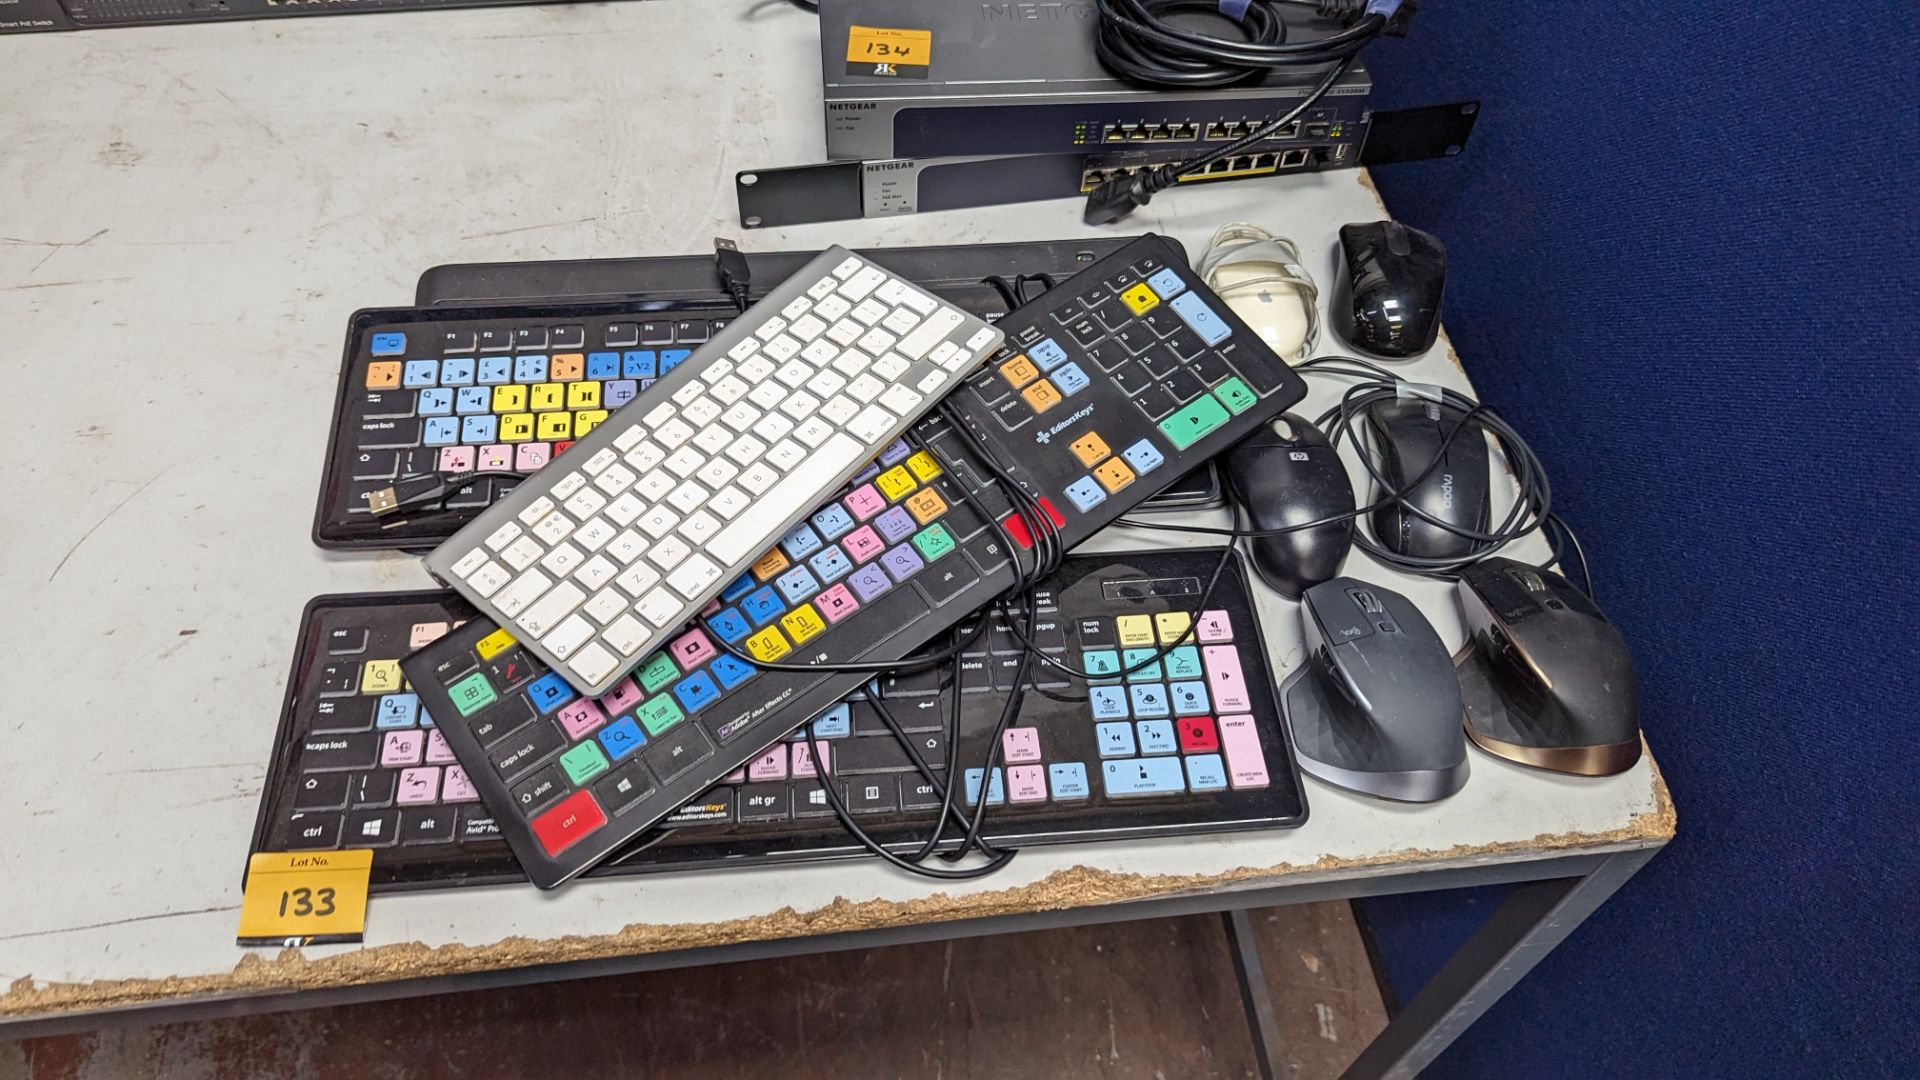 5 assorted keyboards including editing keyboards plus 6 off mice including MX Master